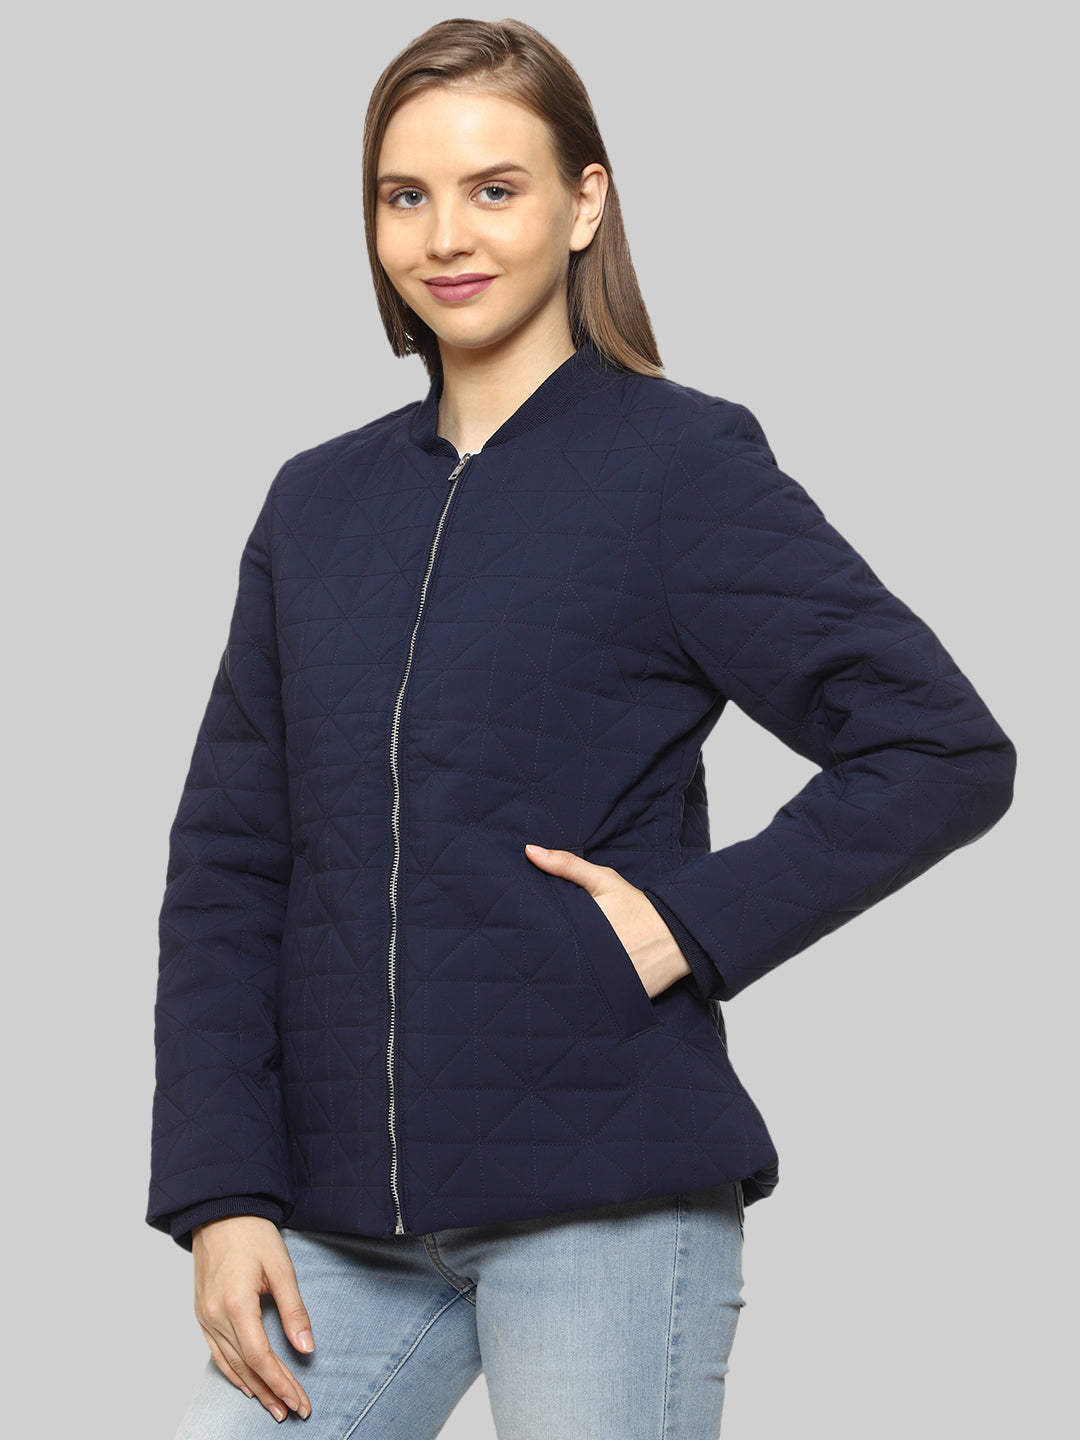 Quilted Jacket For Women